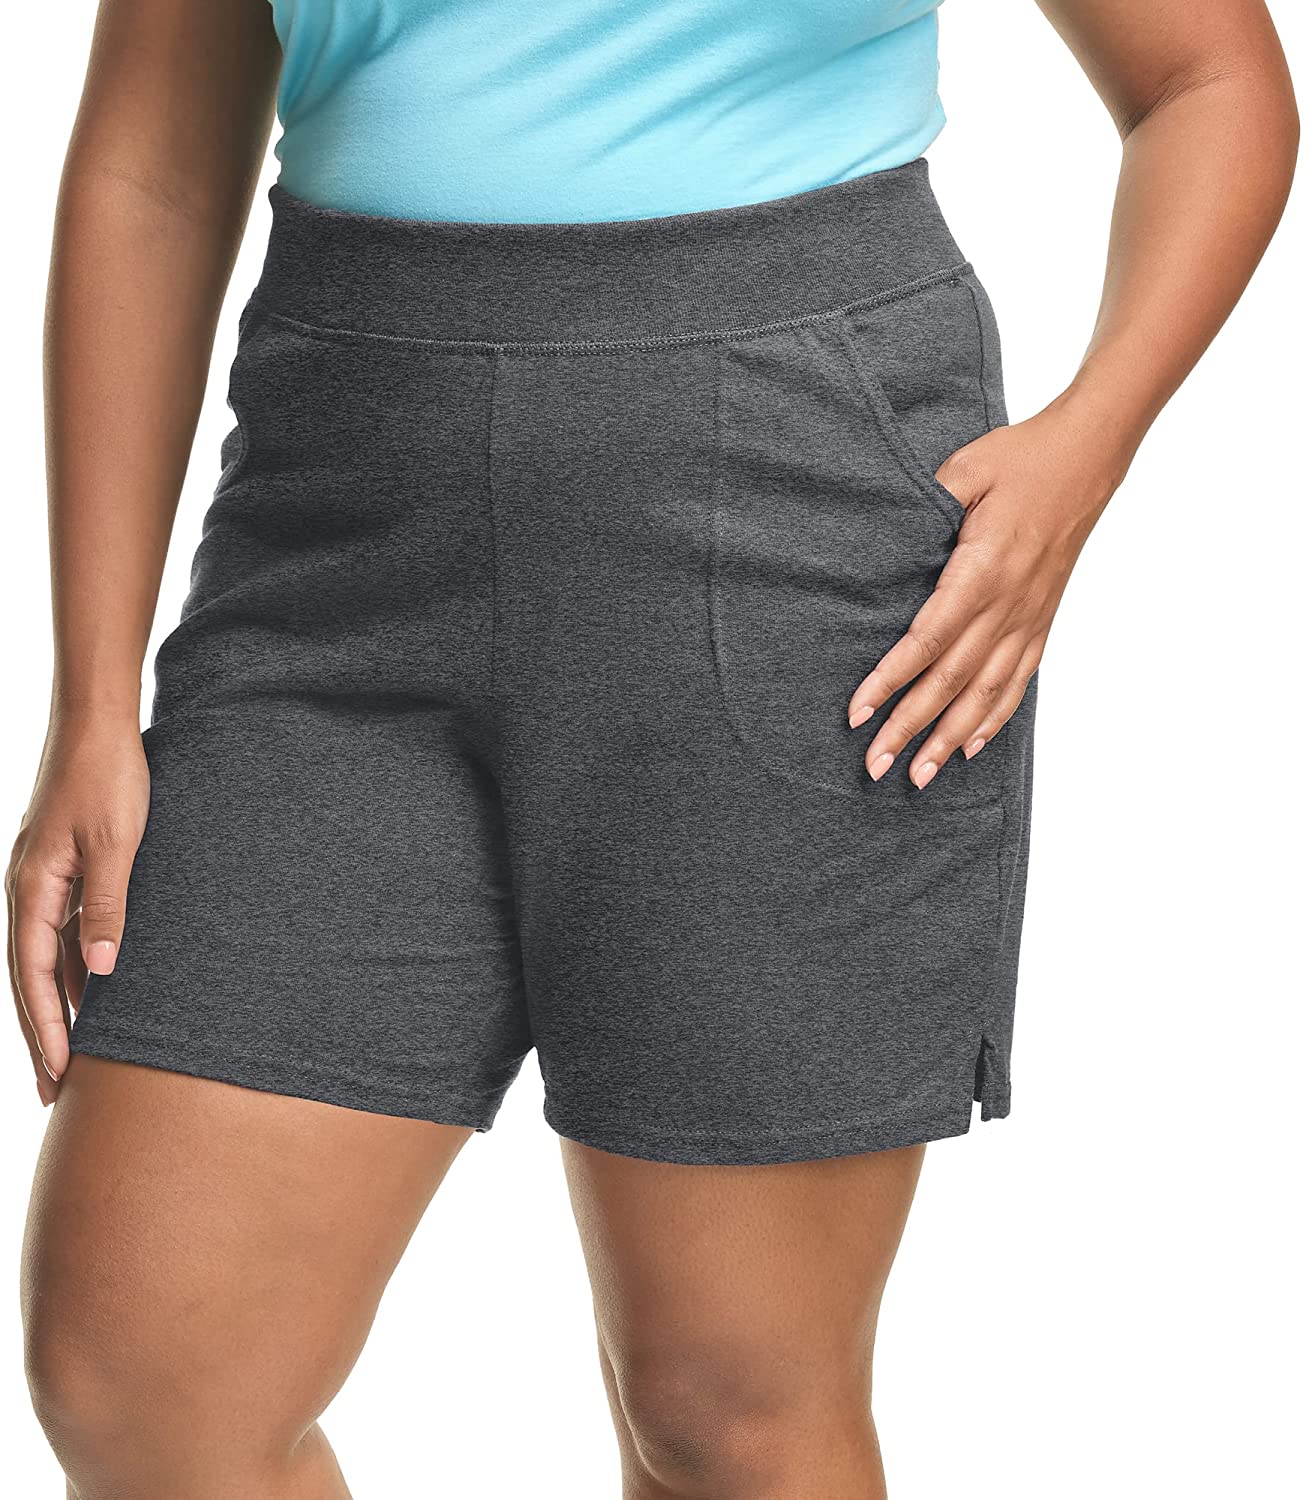 Just My Size Women's Plus Size Cotton Jersey Shorts, Pull-on Gym